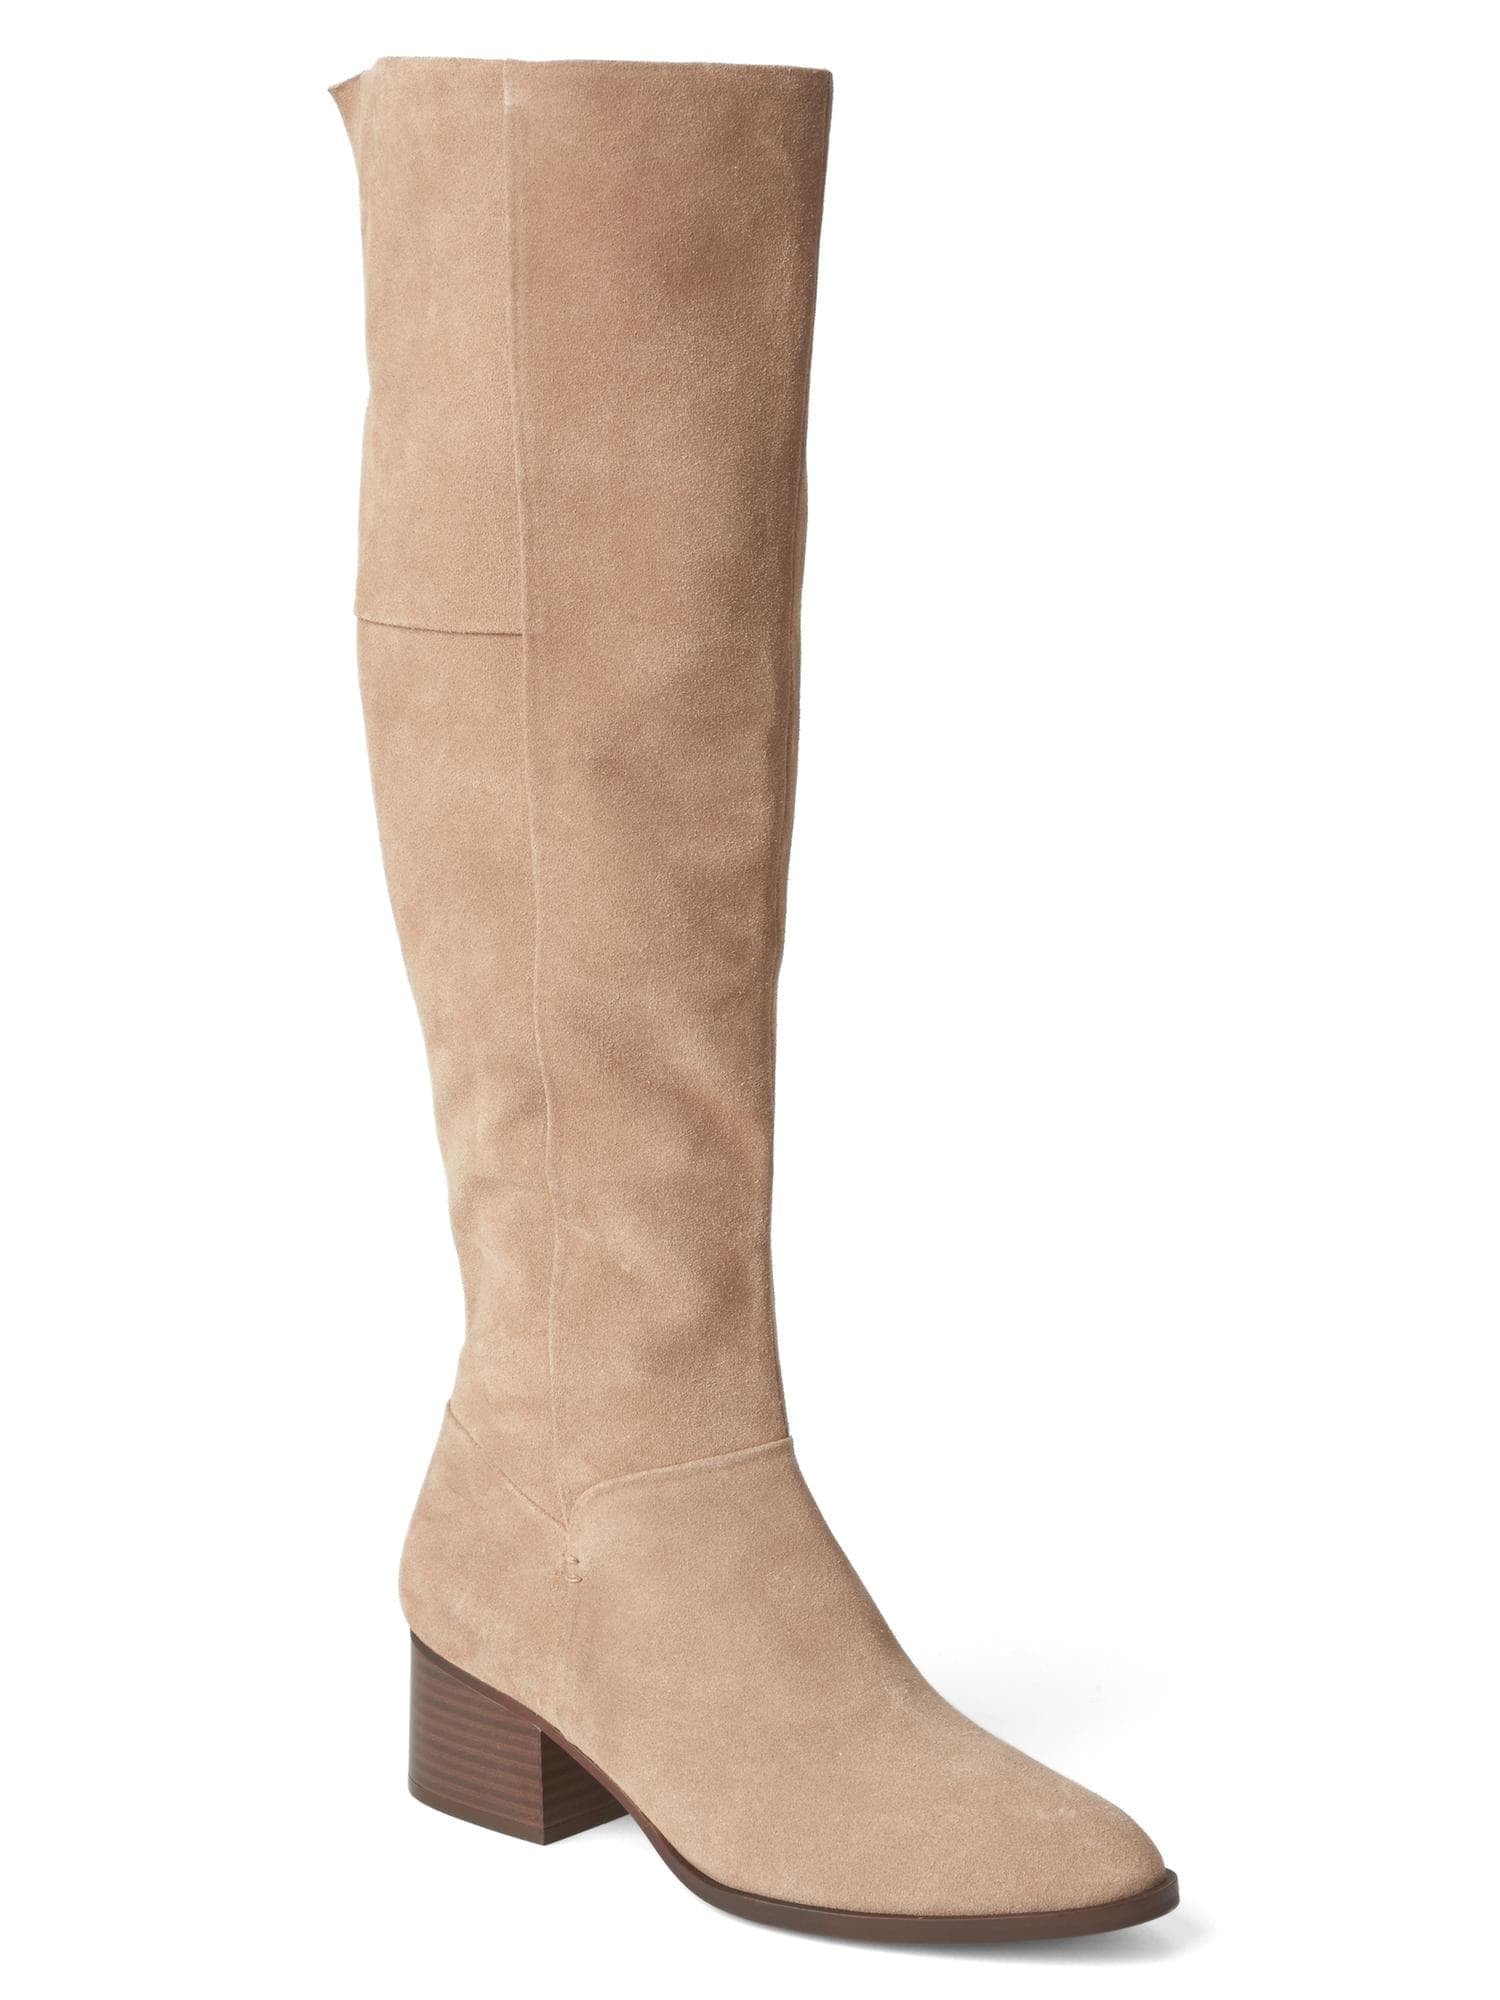 Gap Leather Heel Tall Boots | 19 Neutral-Colored Boots For the Girl Who's Over Black | POPSUGAR Fashion 2